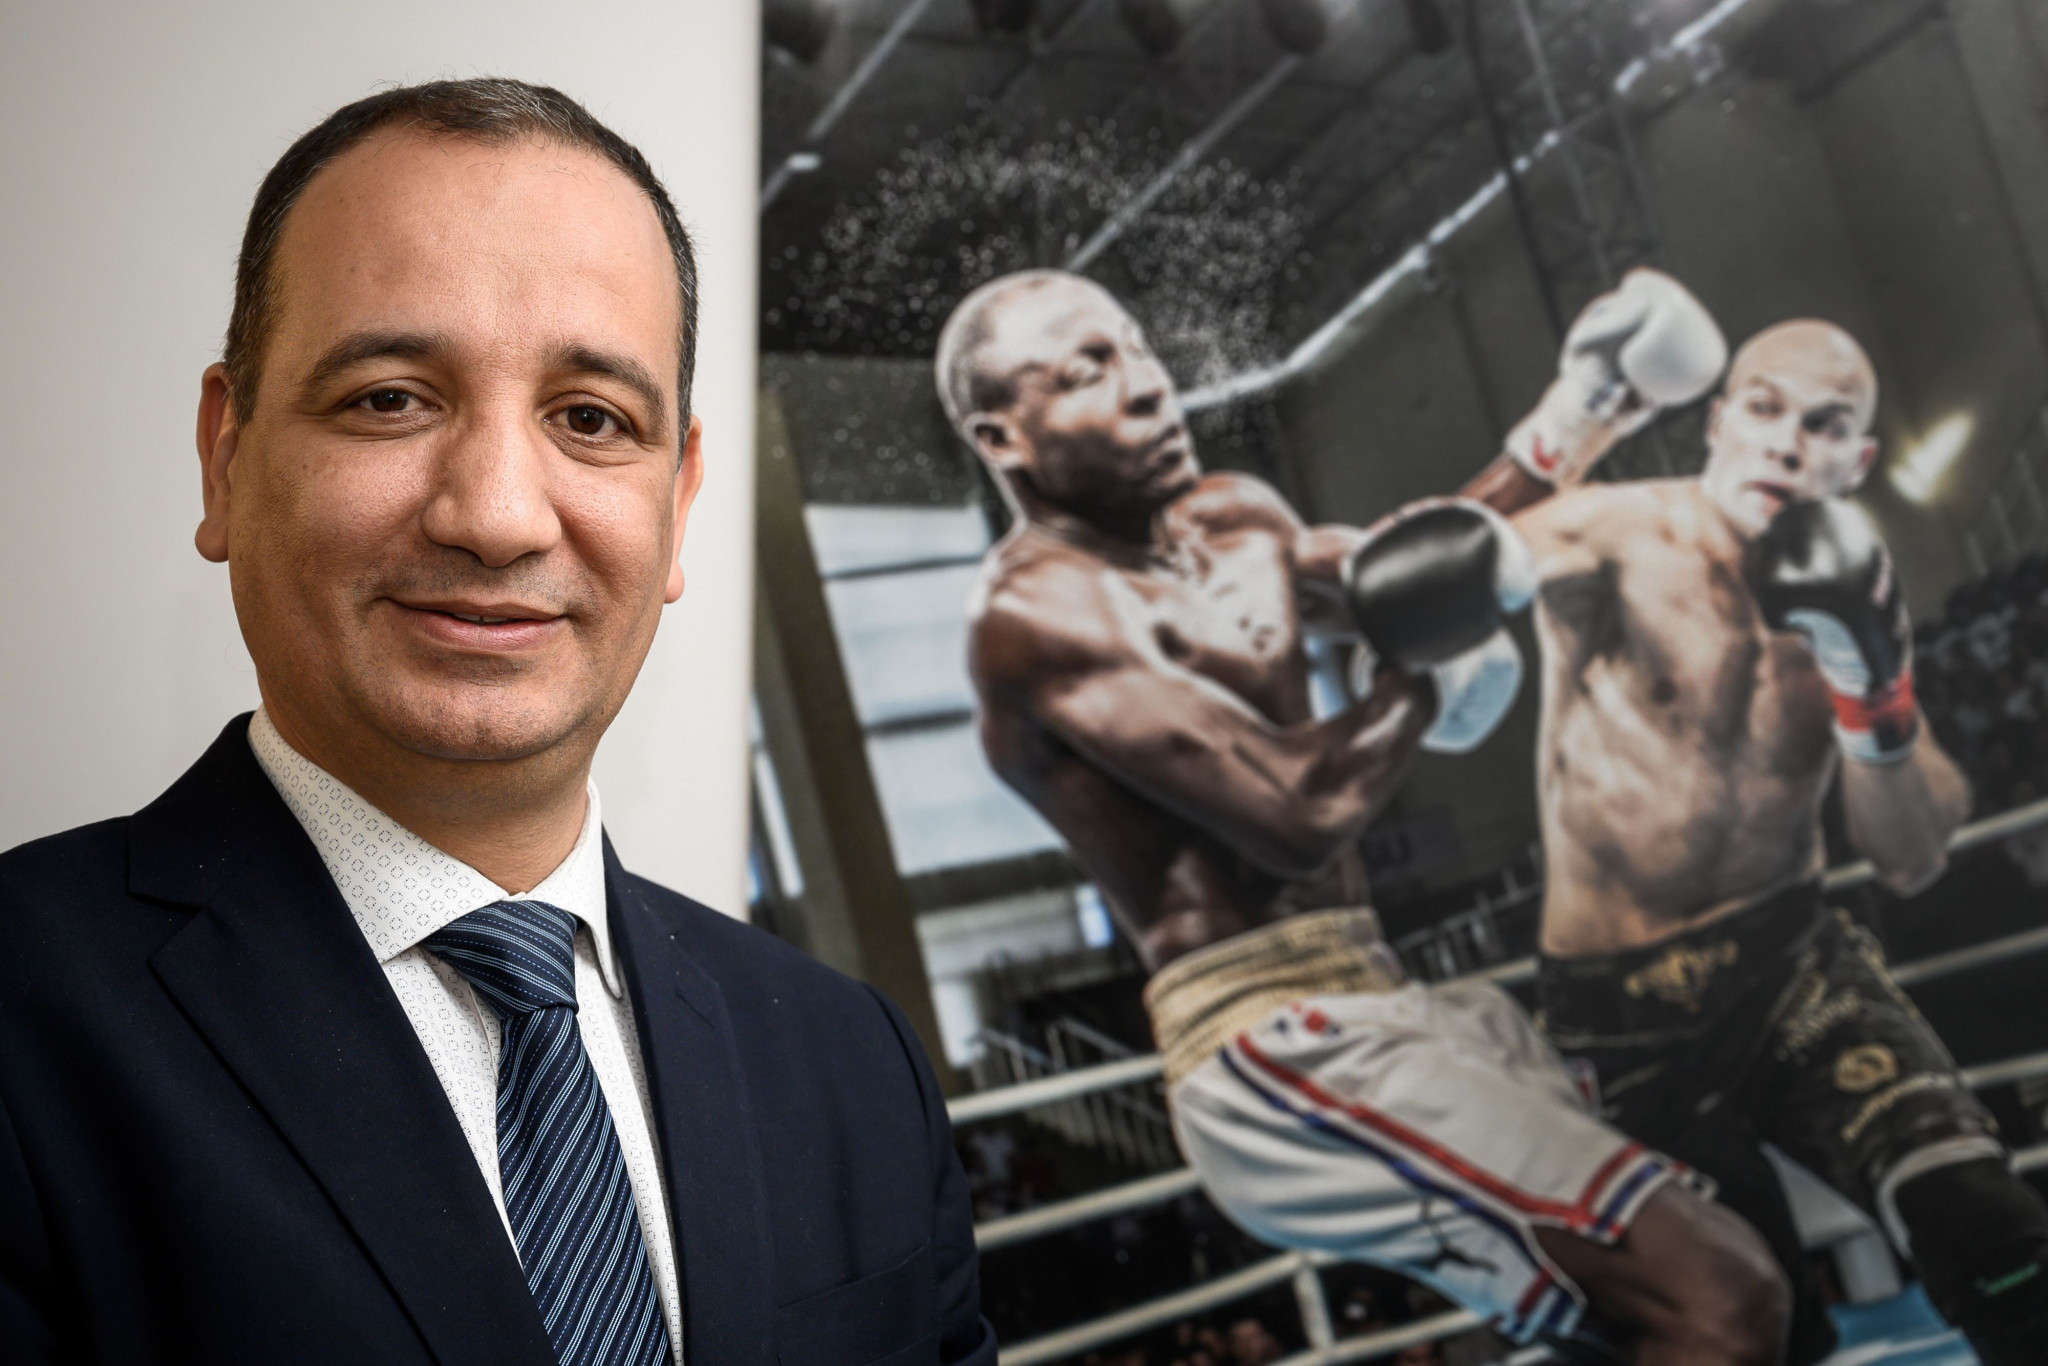 Moustahsane says AIBA name "linked to a lot of problems" as governing body ponders change